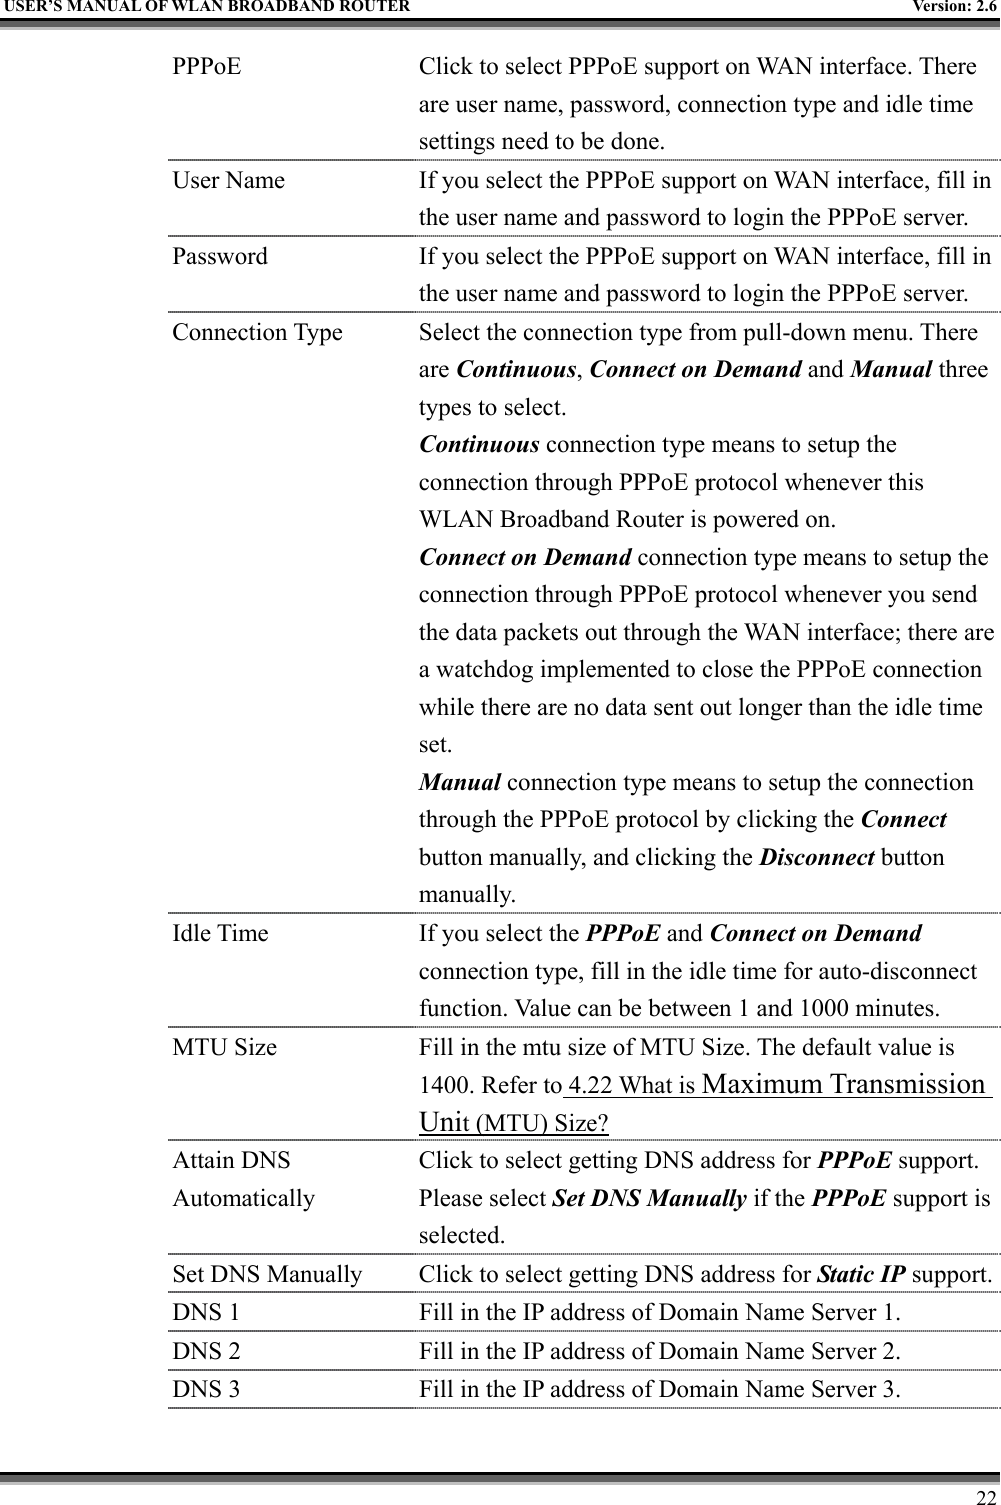   USER’S MANUAL OF WLAN BROADBAND ROUTER    Version: 2.6     22 PPPoE  Click to select PPPoE support on WAN interface. There are user name, password, connection type and idle time settings need to be done. User Name  If you select the PPPoE support on WAN interface, fill in the user name and password to login the PPPoE server. Password  If you select the PPPoE support on WAN interface, fill in the user name and password to login the PPPoE server. Connection Type  Select the connection type from pull-down menu. There are Continuous, Connect on Demand and Manual three types to select. Continuous connection type means to setup the connection through PPPoE protocol whenever this WLAN Broadband Router is powered on. Connect on Demand connection type means to setup the connection through PPPoE protocol whenever you send the data packets out through the WAN interface; there are a watchdog implemented to close the PPPoE connection while there are no data sent out longer than the idle time set. Manual connection type means to setup the connection through the PPPoE protocol by clicking the Connect button manually, and clicking the Disconnect button manually. Idle Time  If you select the PPPoE and Connect on Demand connection type, fill in the idle time for auto-disconnect function. Value can be between 1 and 1000 minutes. MTU Size  Fill in the mtu size of MTU Size. The default value is 1400. Refer to 4.22 What is Maximum Transmission Unit (MTU) Size? Attain DNS Automatically Click to select getting DNS address for PPPoE support. Please select Set DNS Manually if the PPPoE support is selected. Set DNS Manually  Click to select getting DNS address for Static IP support.DNS 1  Fill in the IP address of Domain Name Server 1. DNS 2  Fill in the IP address of Domain Name Server 2. DNS 3  Fill in the IP address of Domain Name Server 3. 